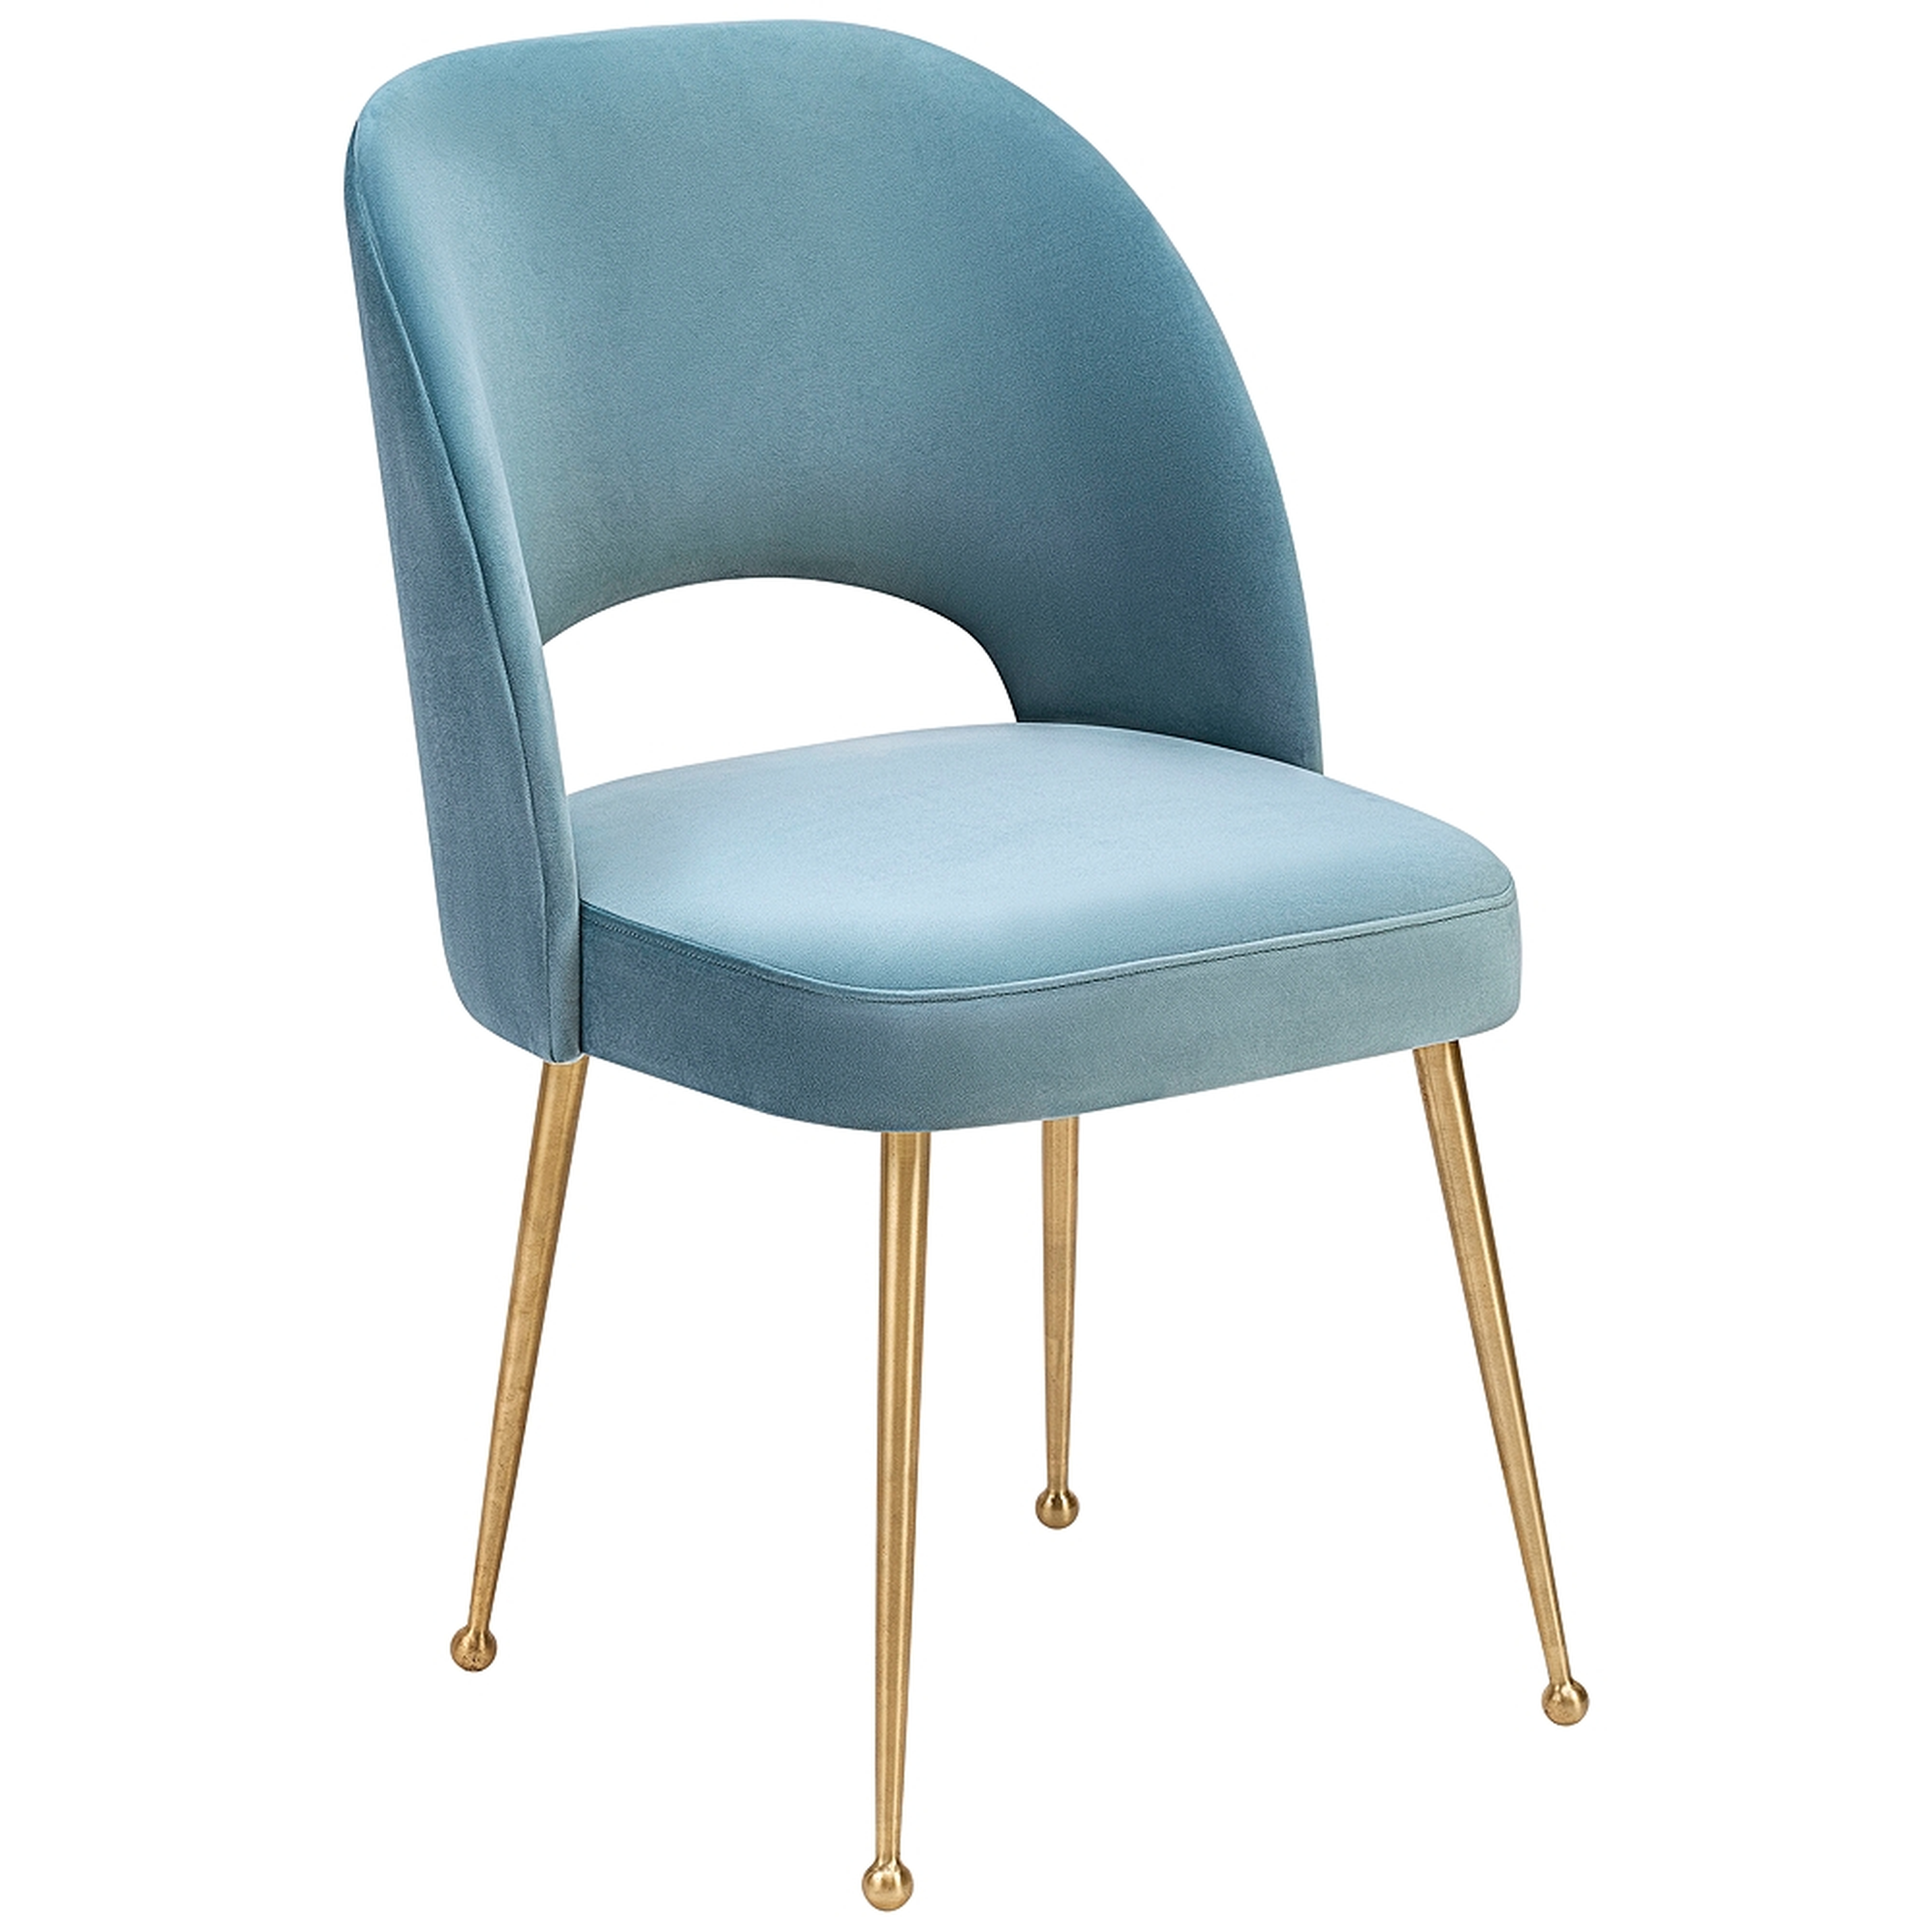 Swell Sea Blue Velvet Dining Chair - Style # 40T44 - Lamps Plus